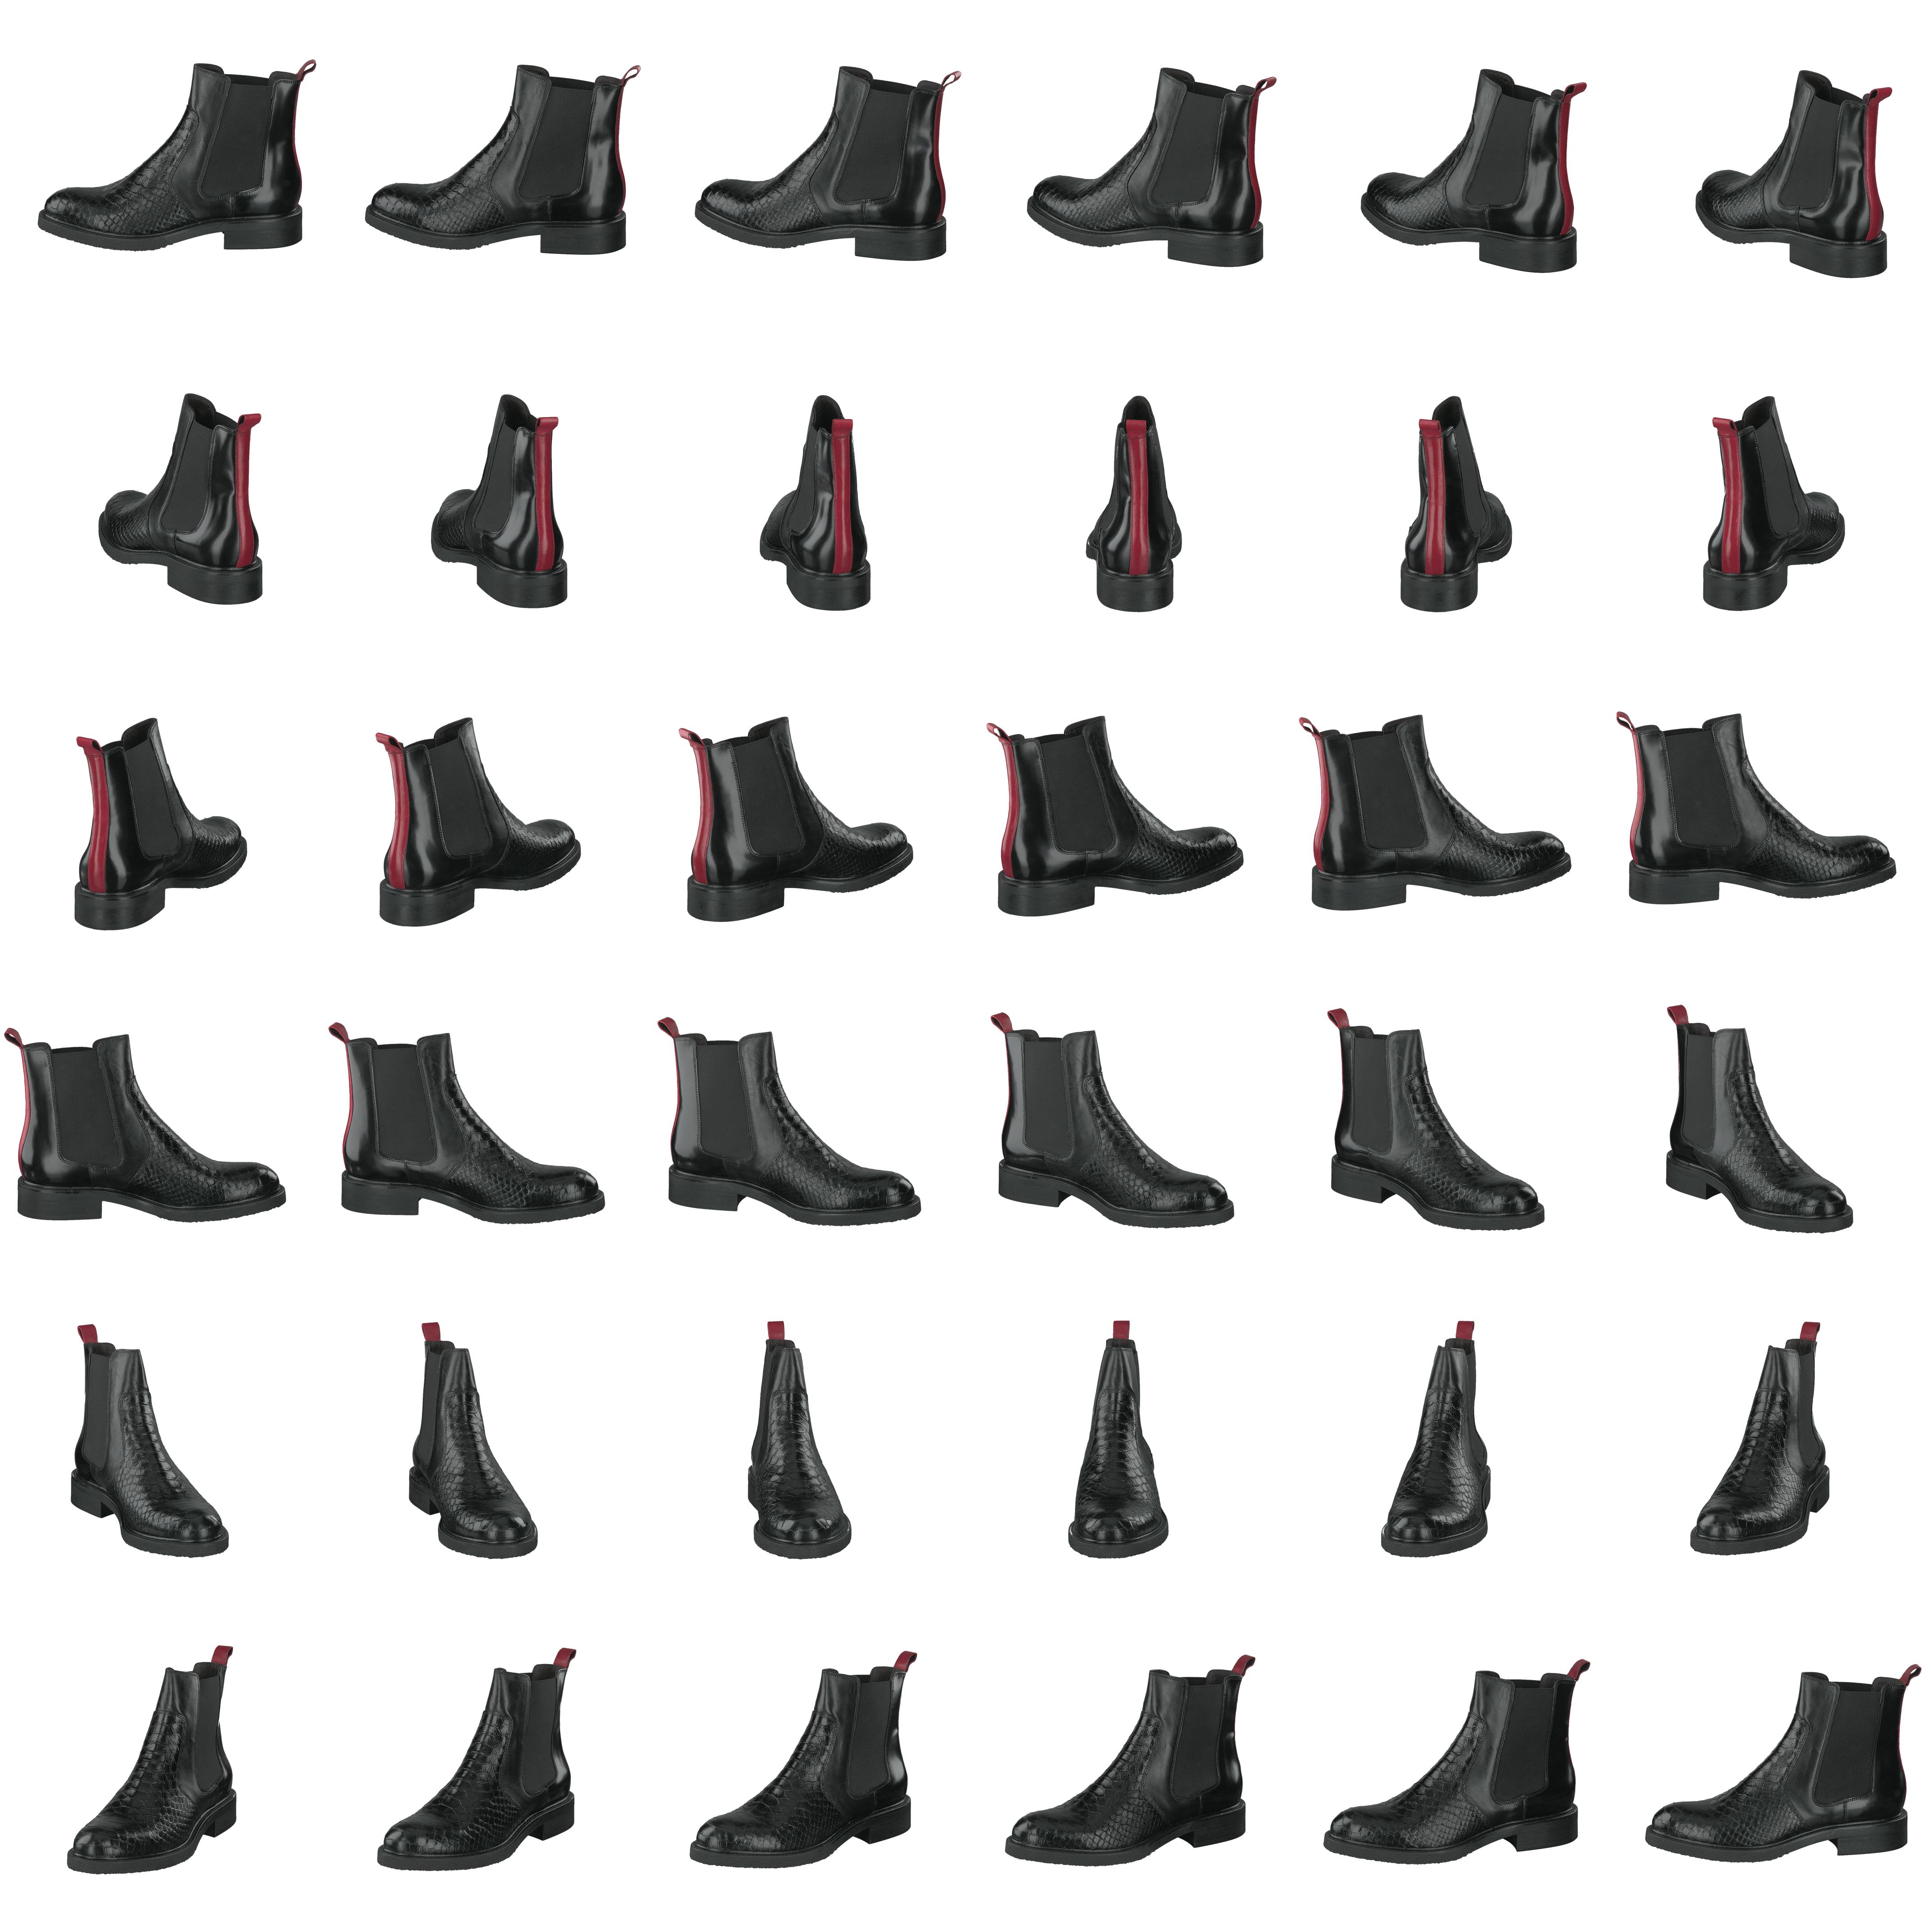 buket rørledning spektrum 7424-319 Black/red | Shoes for every occasion | Footway